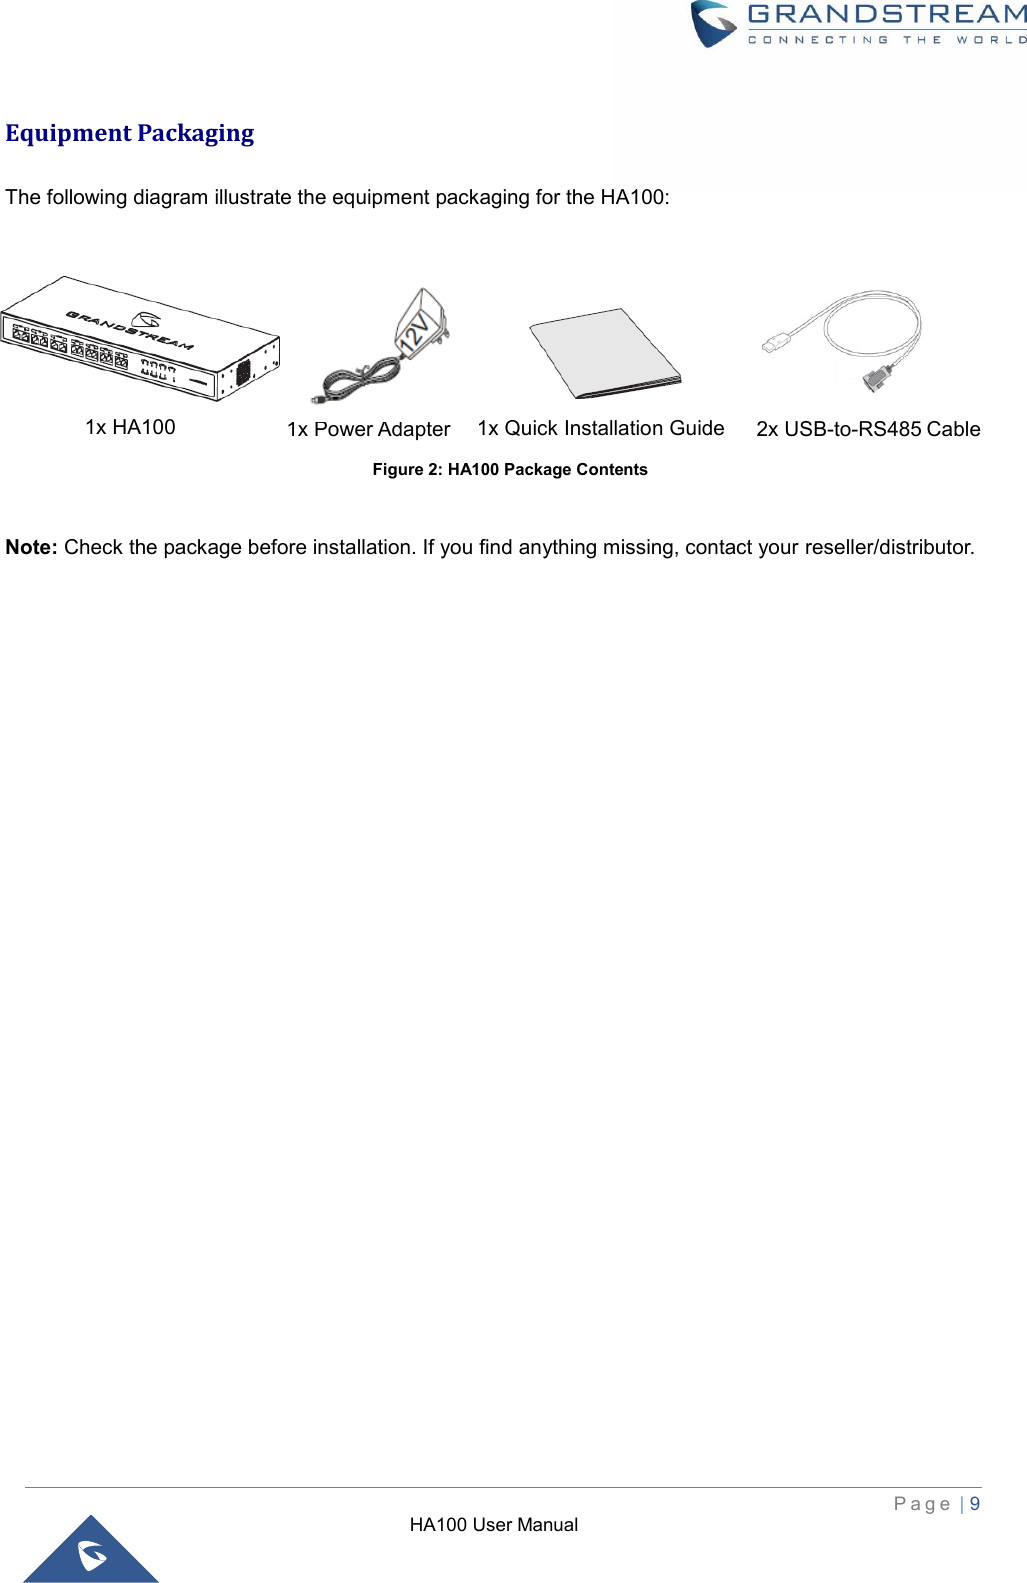 HA100 User Manual  P a g e  | 9    Equipment Packaging  The following diagram illustrate the equipment packaging for the HA100:                                                                       Note: Check the package before installation. If you find anything missing, contact your reseller/distributor. 1x Quick Installation Guide 1x Power Adapter 1x HA100 2x USB-to-RS485 Cable Figure 2: HA100 Package Contents 